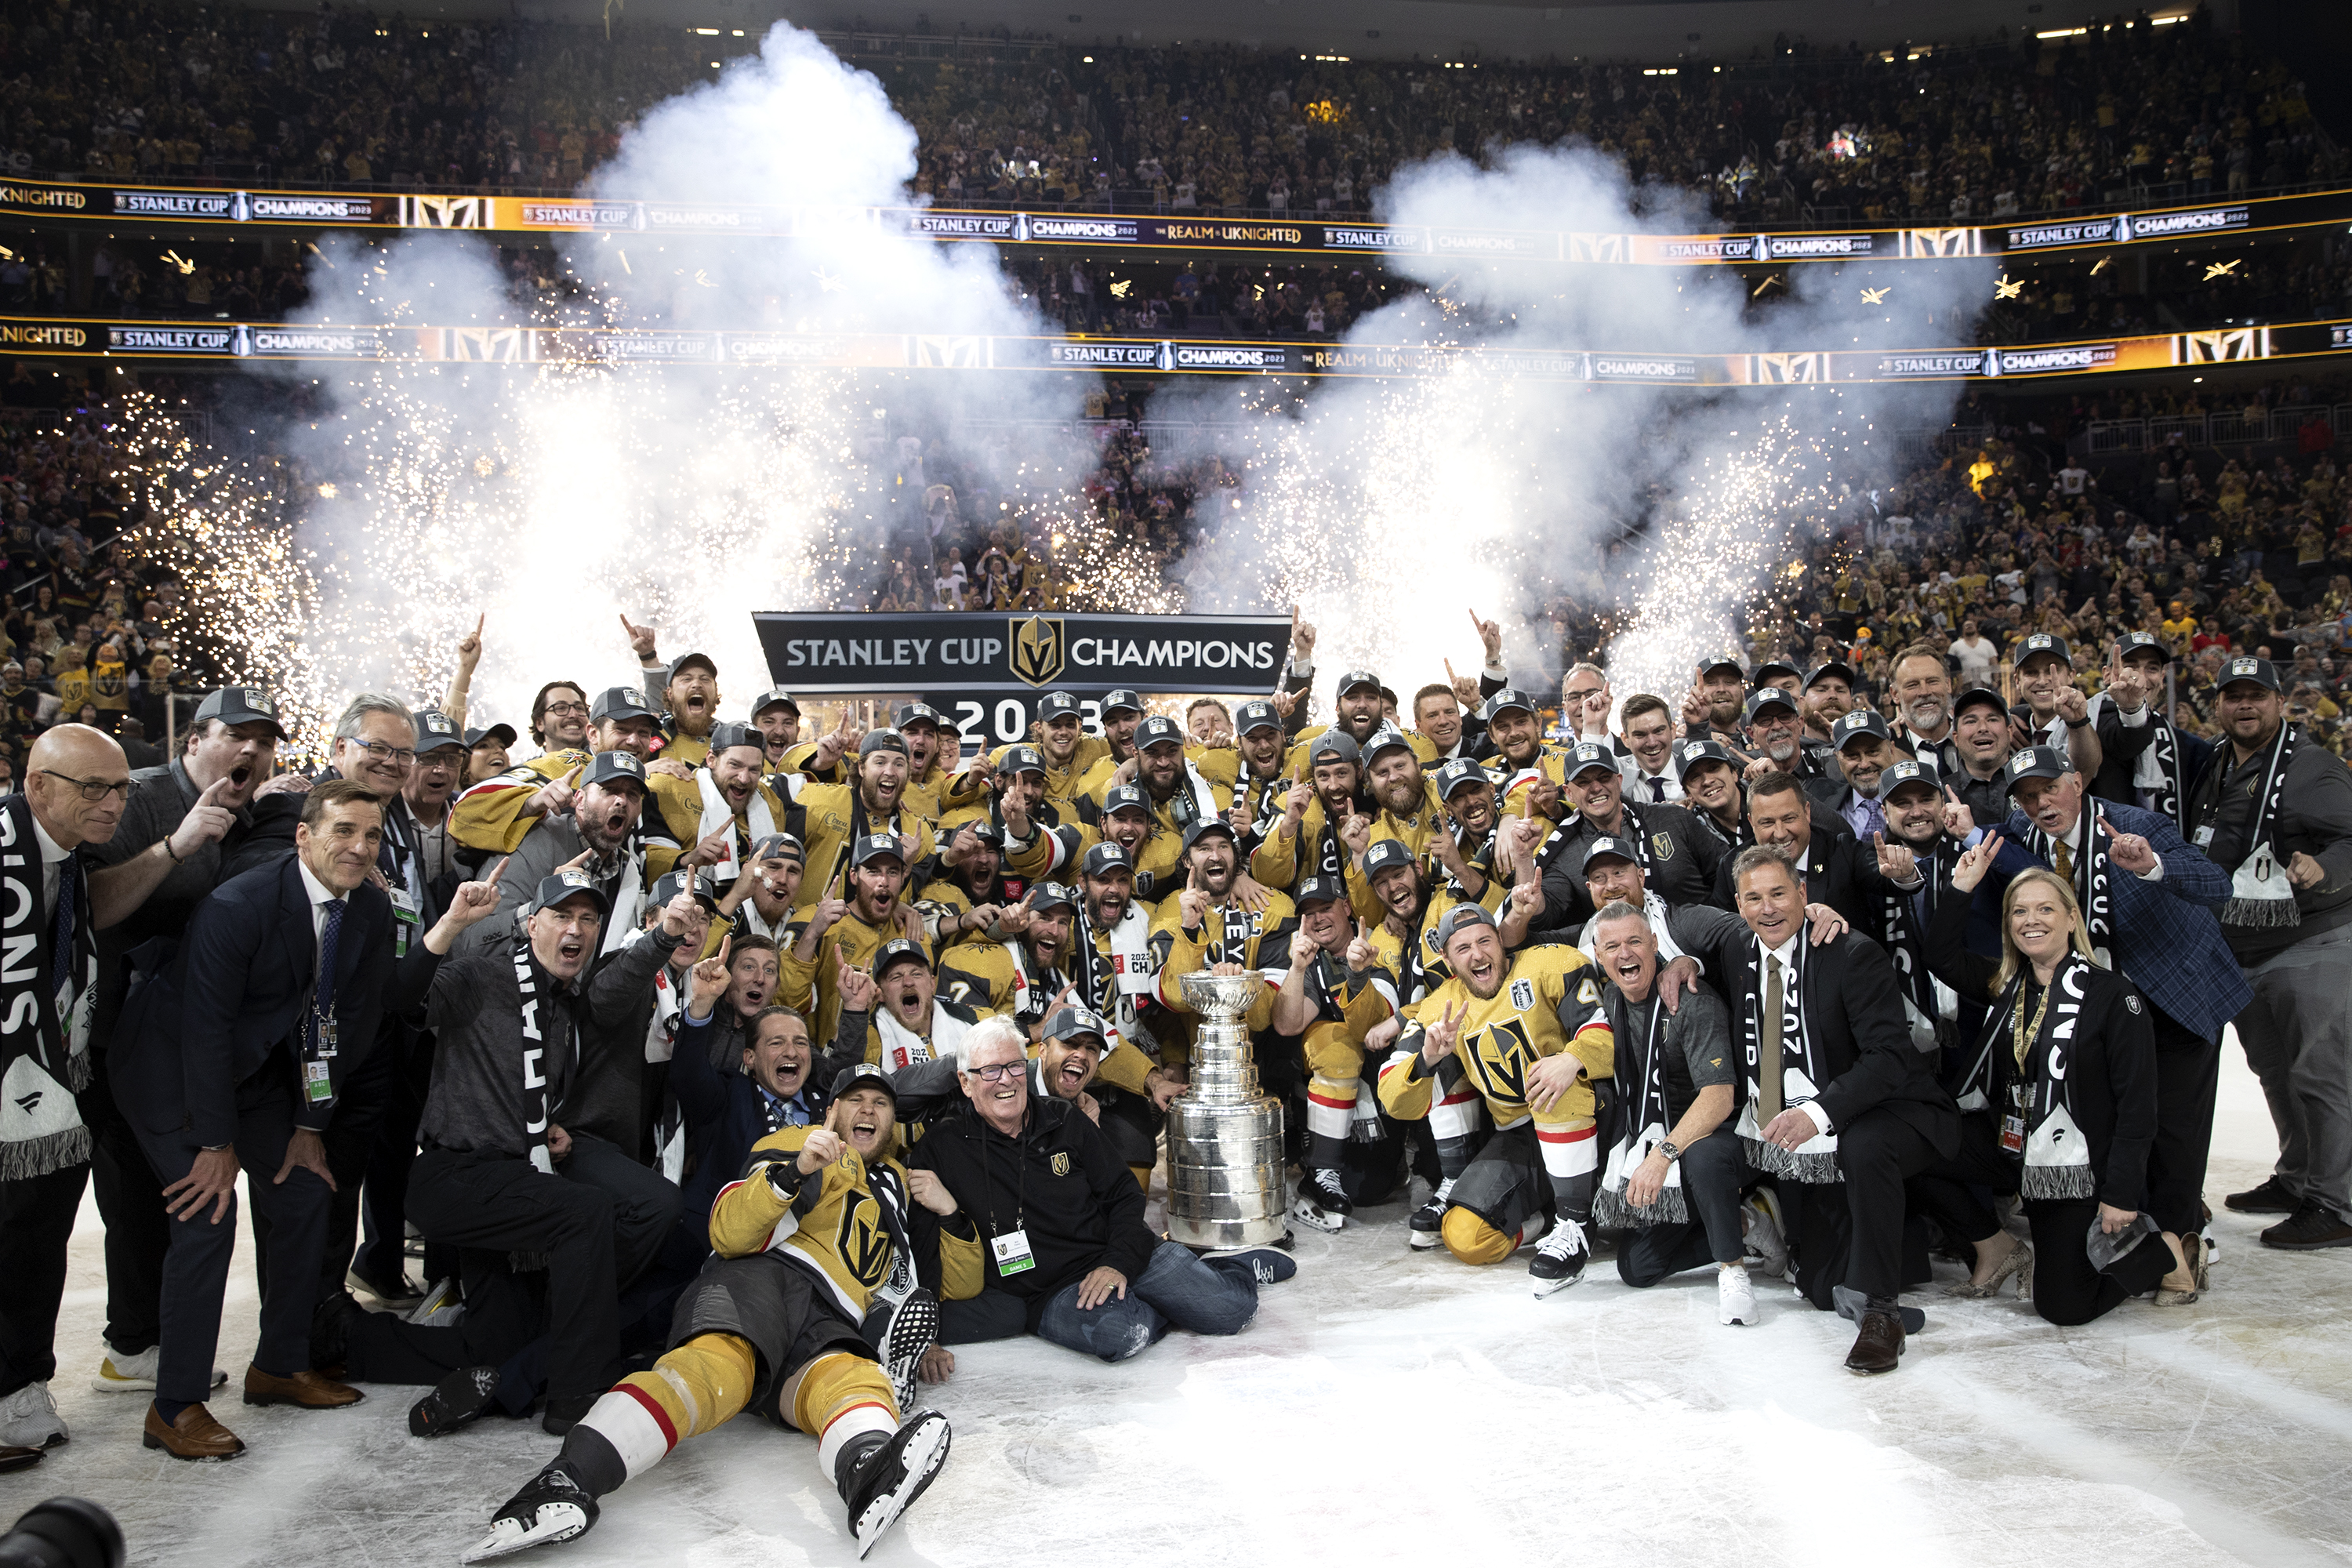 Relive the moment VGK won the Stanley Cup